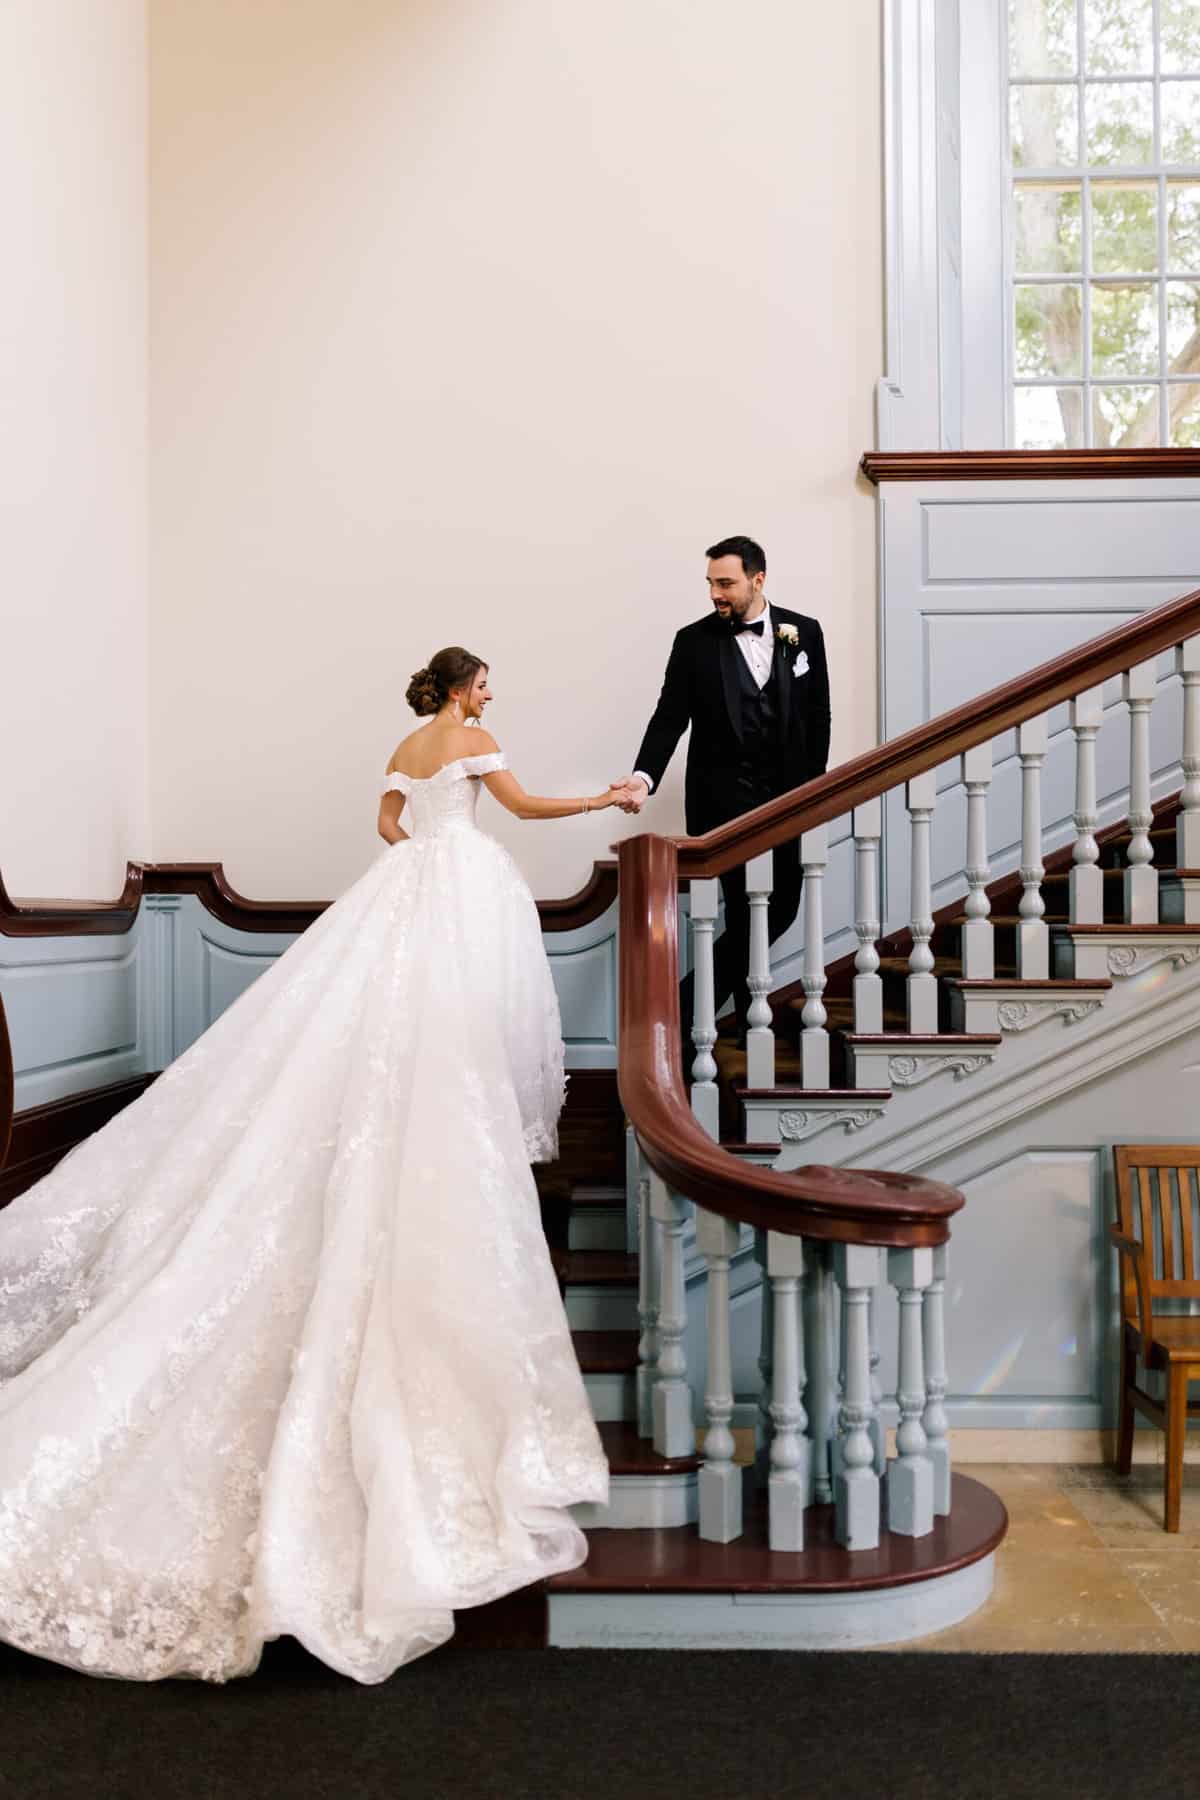 A groom leading a bride up a flight of stairs. 